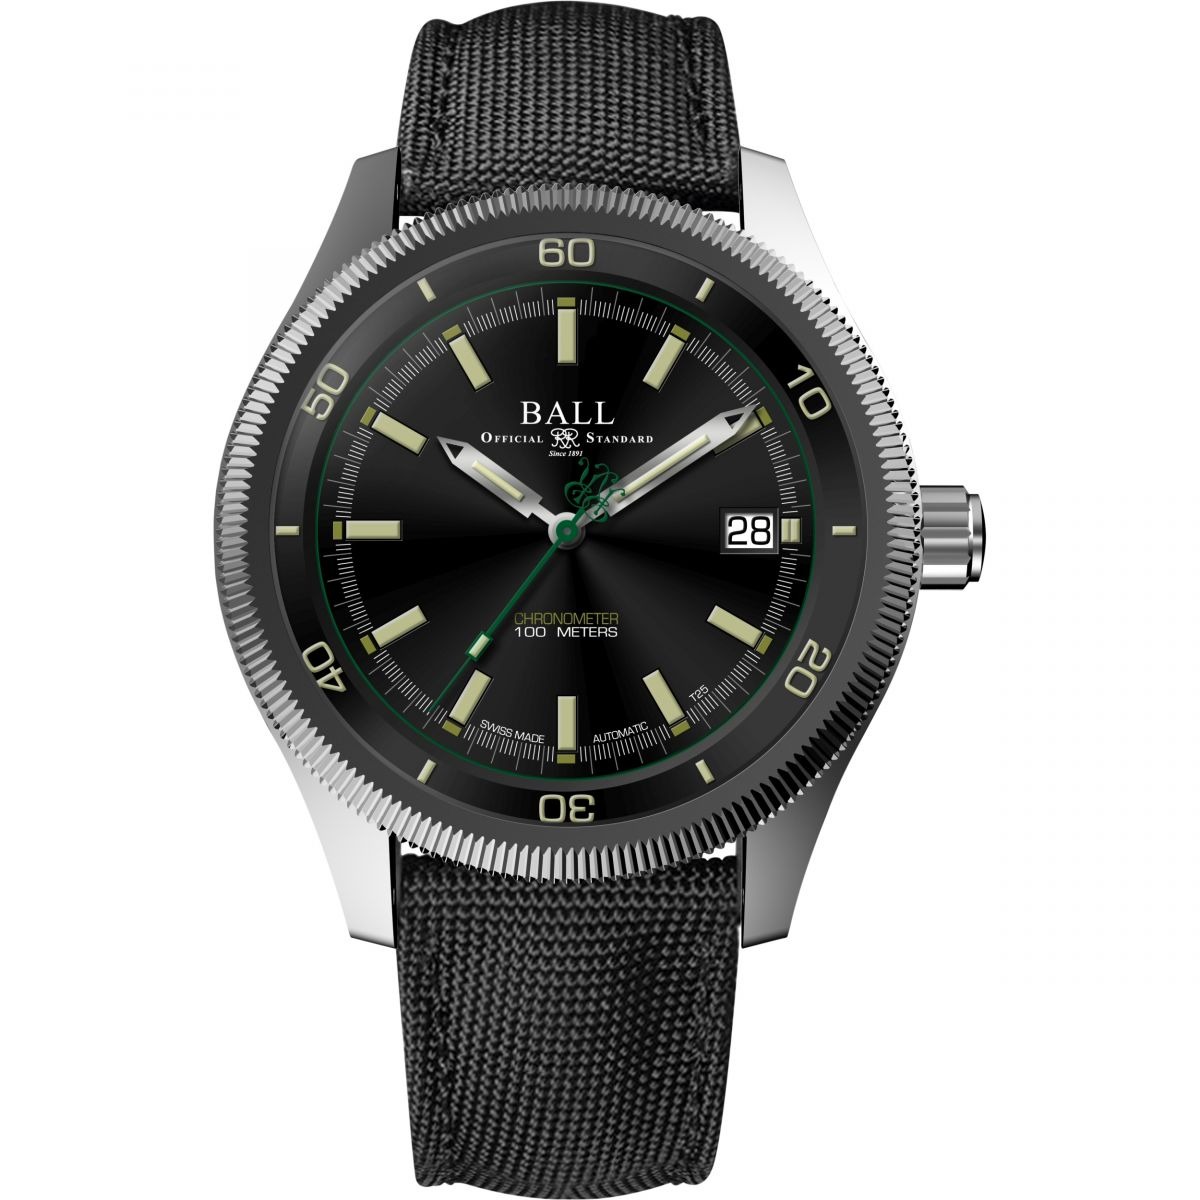 Watch Shop - Watch in Black for Man by Ball GOOFASH